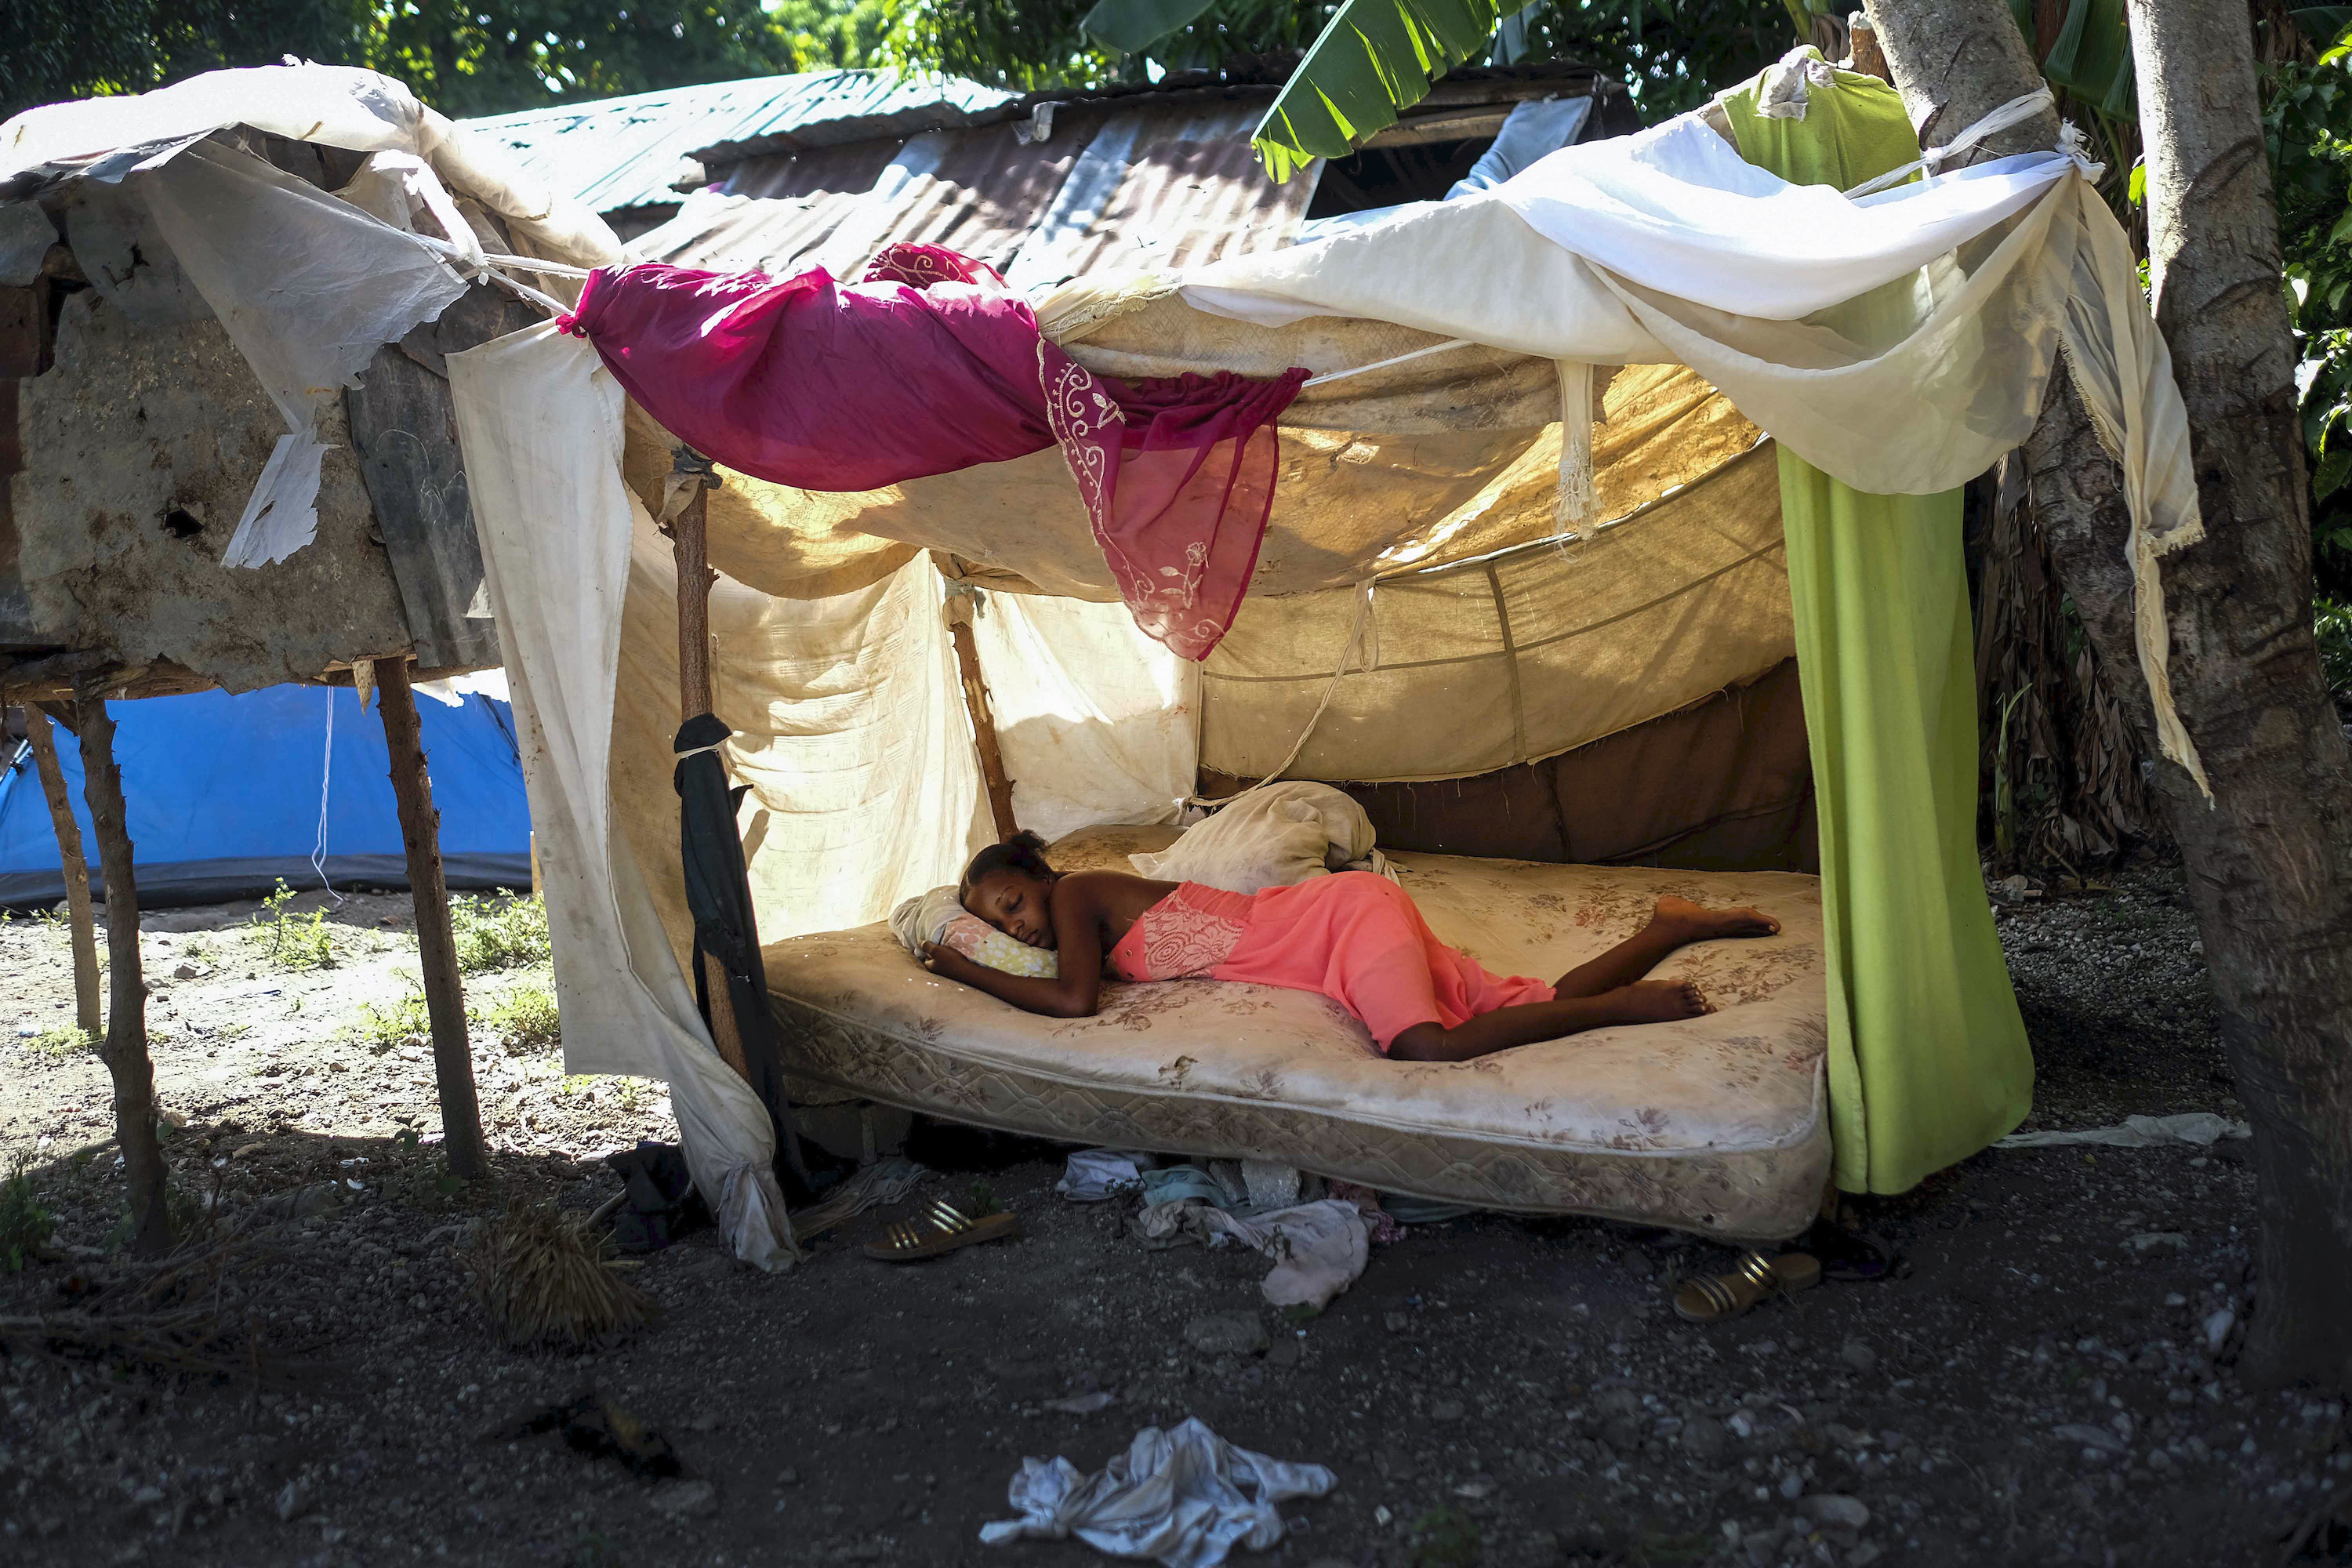 A woman sleeps under a makeshift bed on the ground under the shade of hung-up blankets